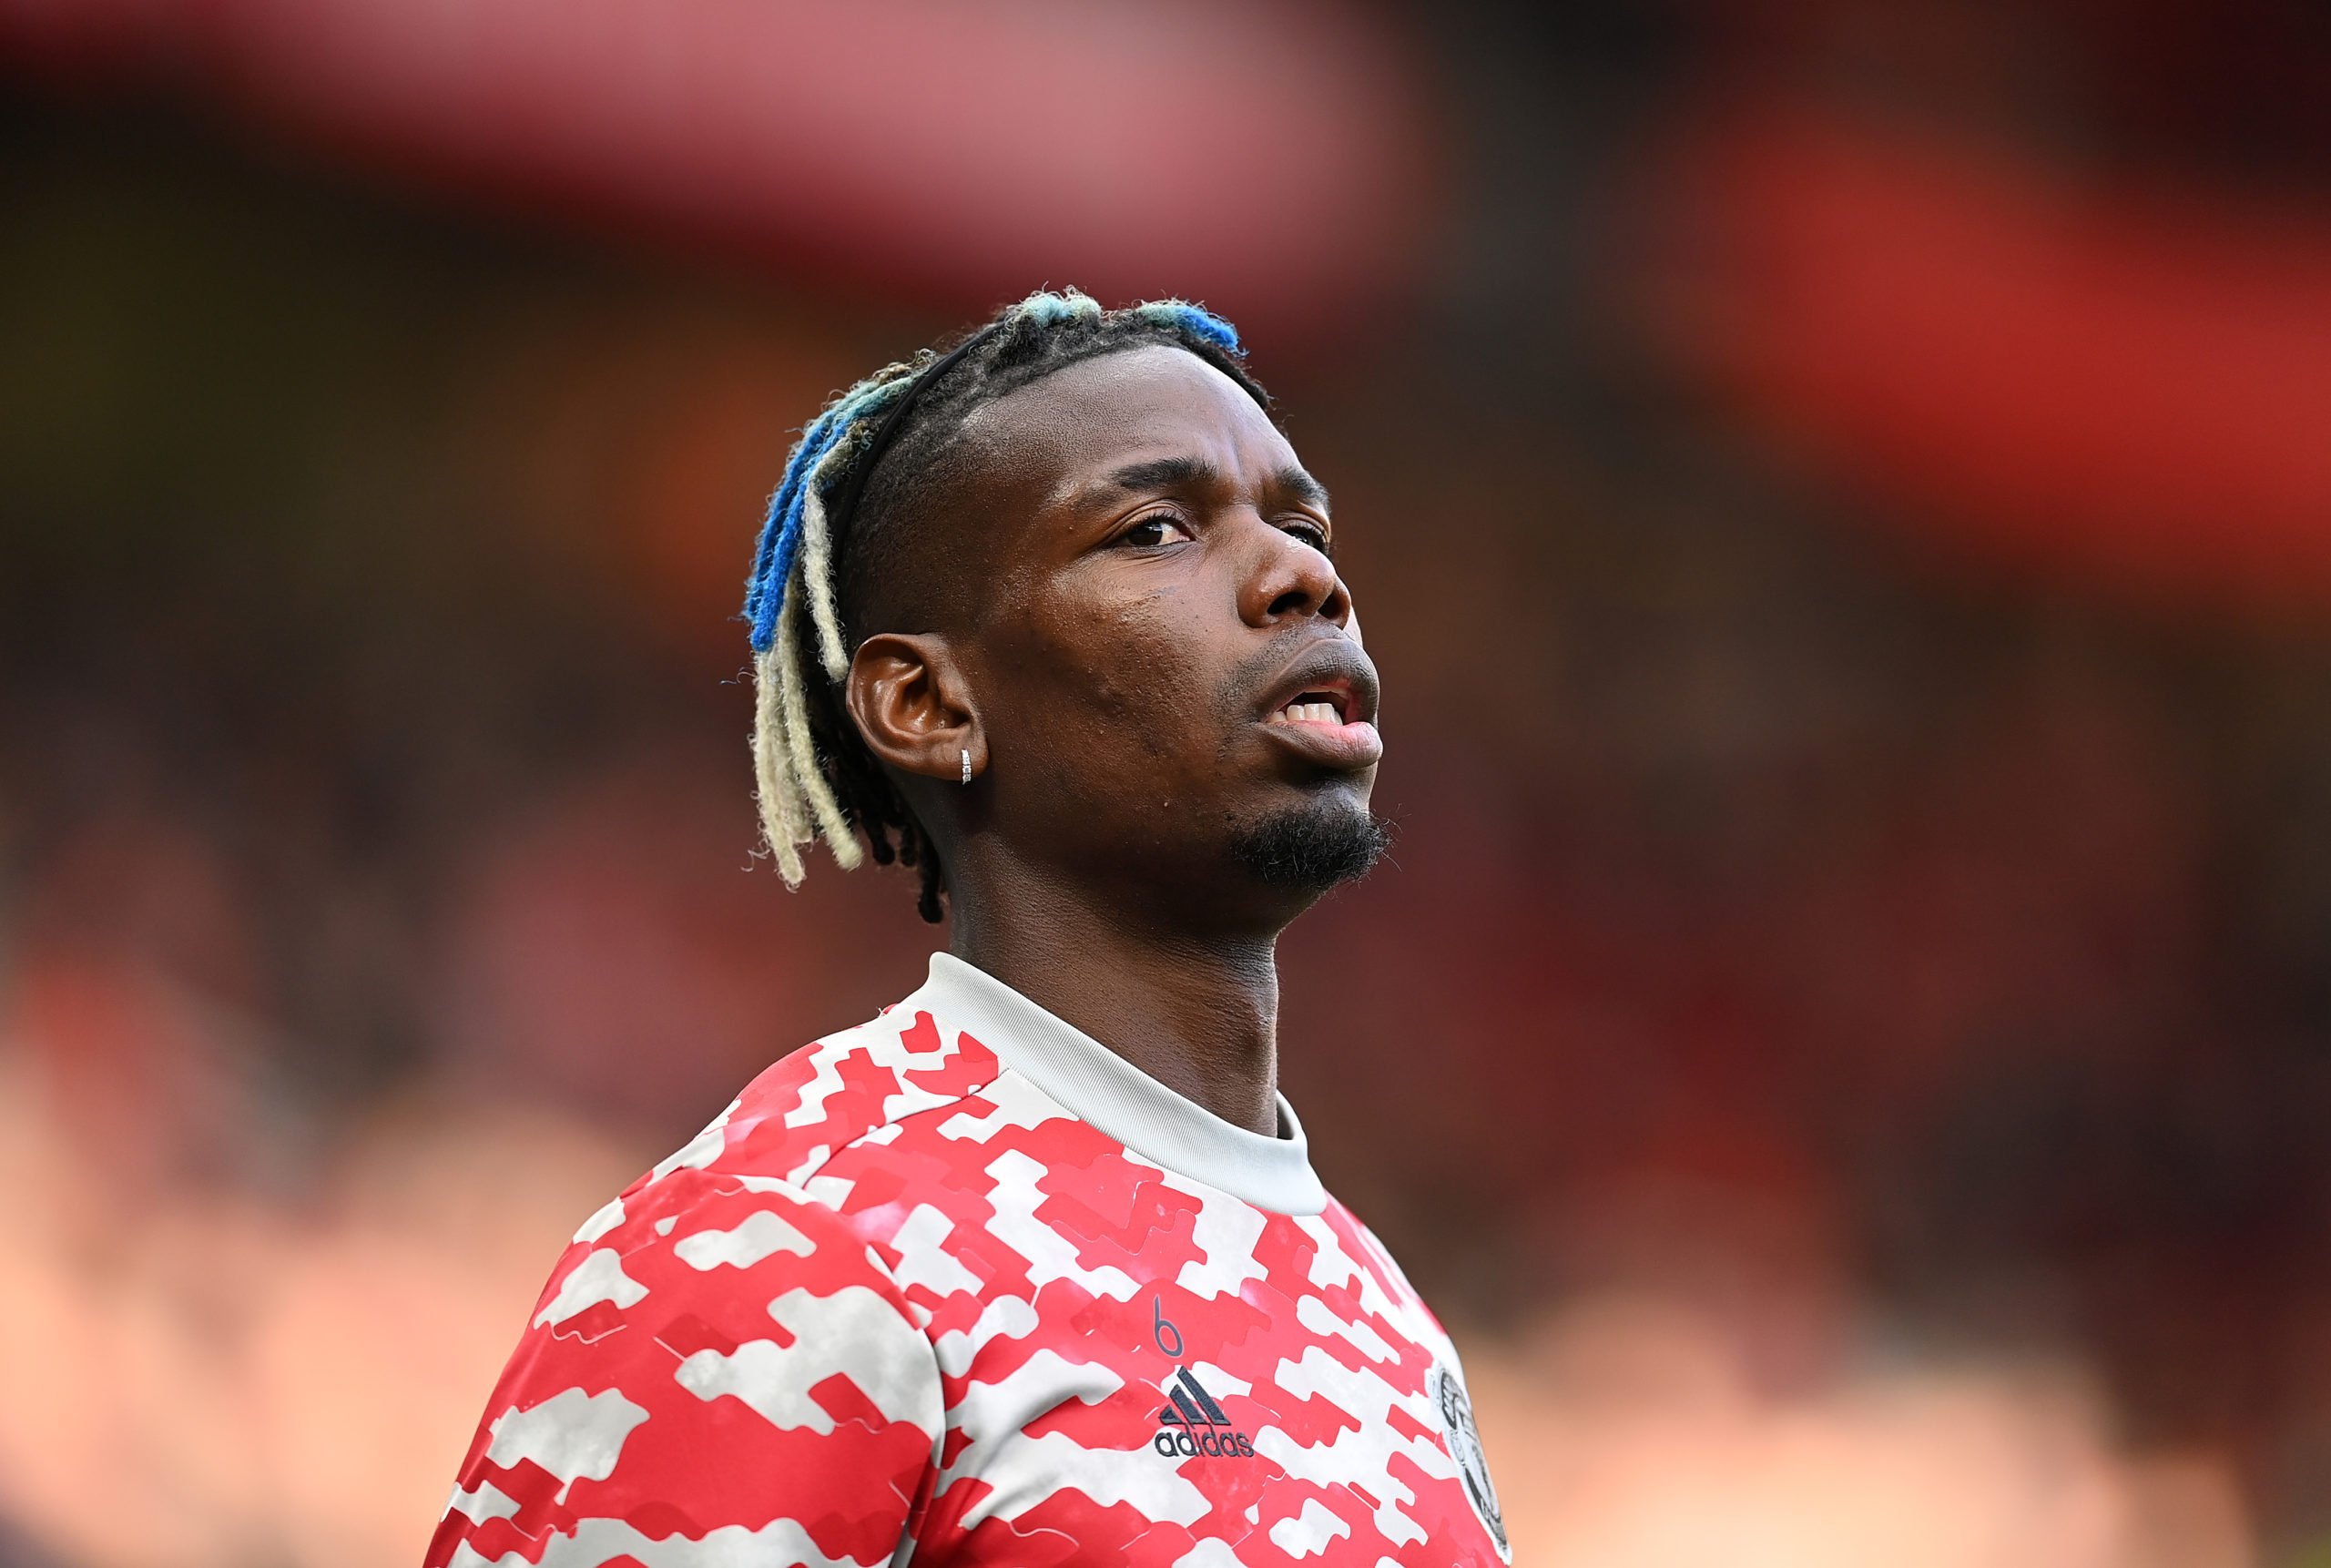 Manchester United must let Paul Pogba go, says ex England women's footballer